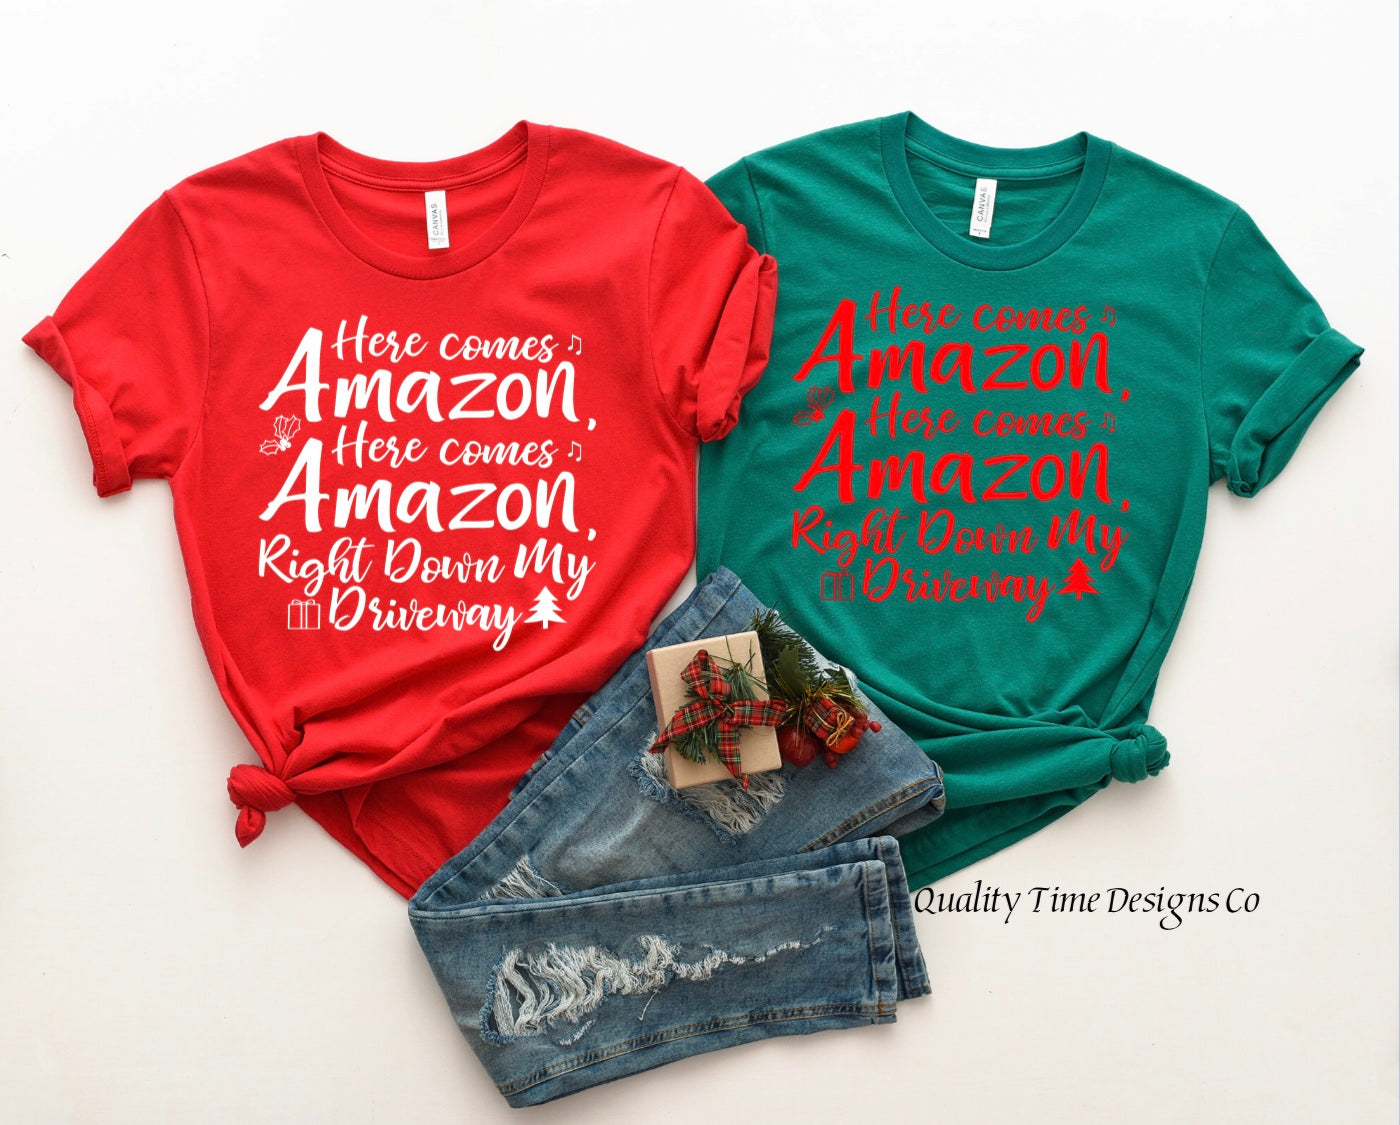 Here comes Amazon here comes Amazon right down my driveway t-shirt 